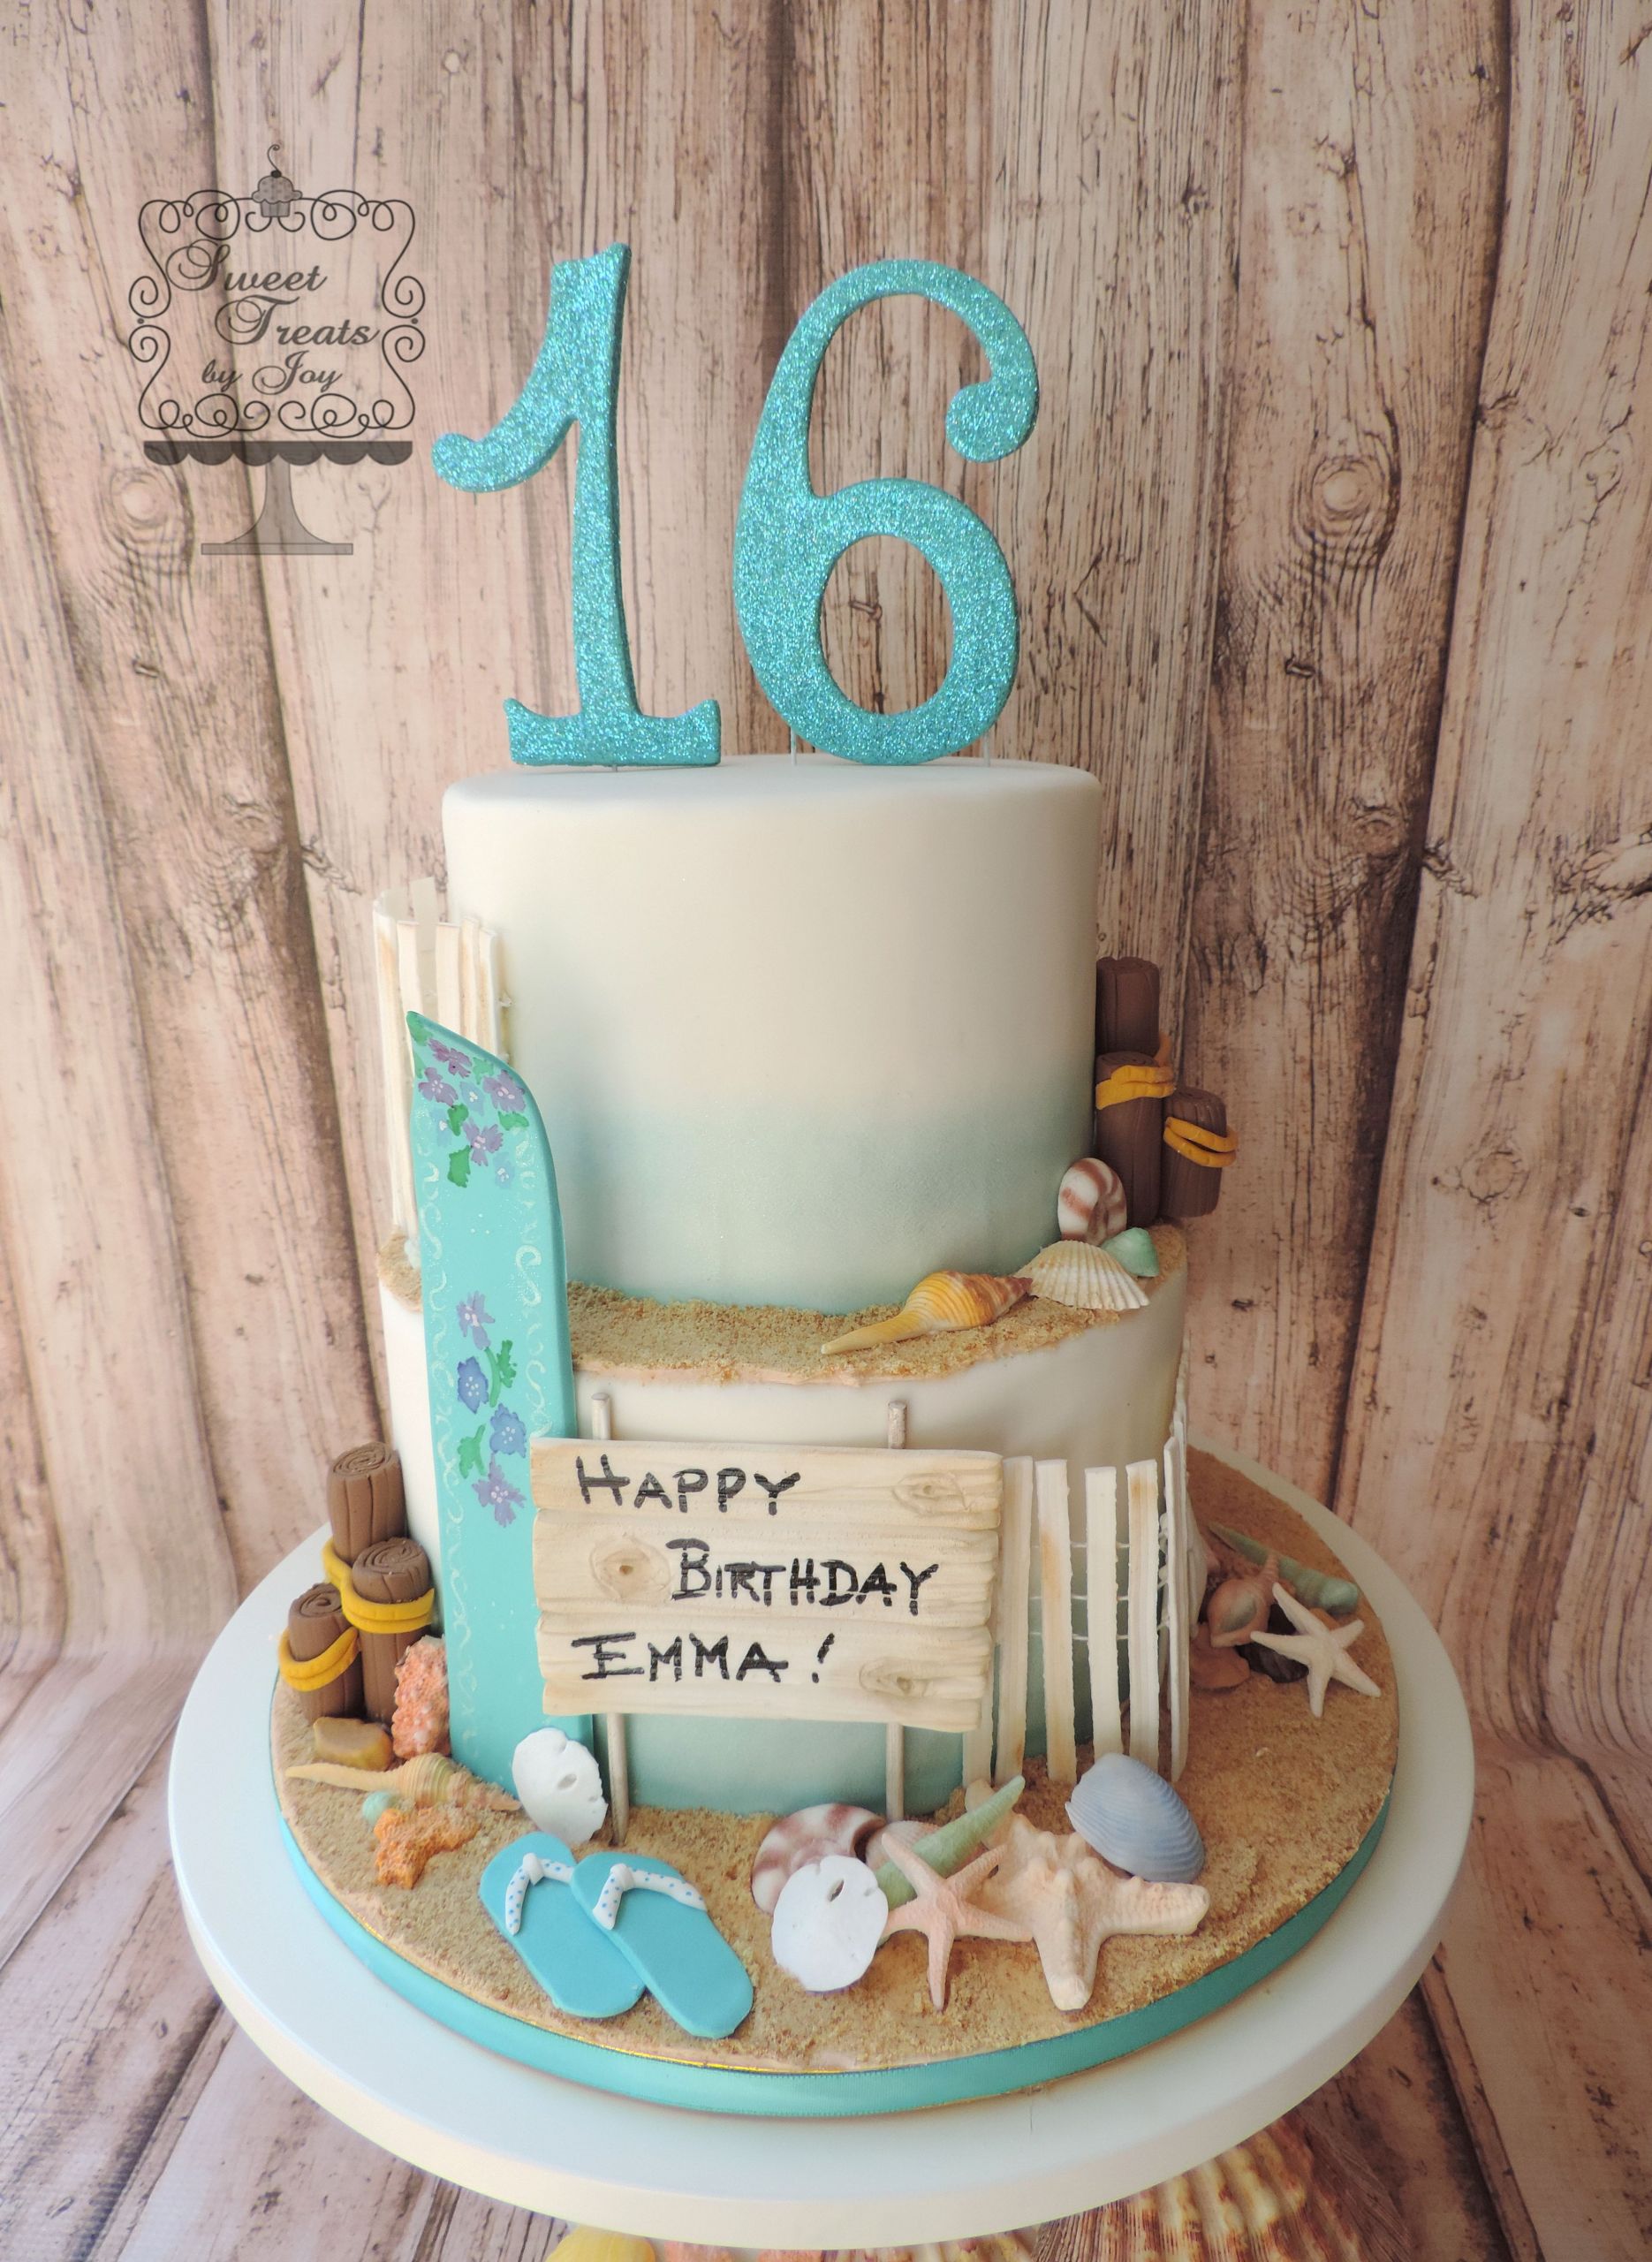 Sweet 16 Birthday Pool Party Ideas
 Beach cake for Sweet 16 birthday Surfboard shells and